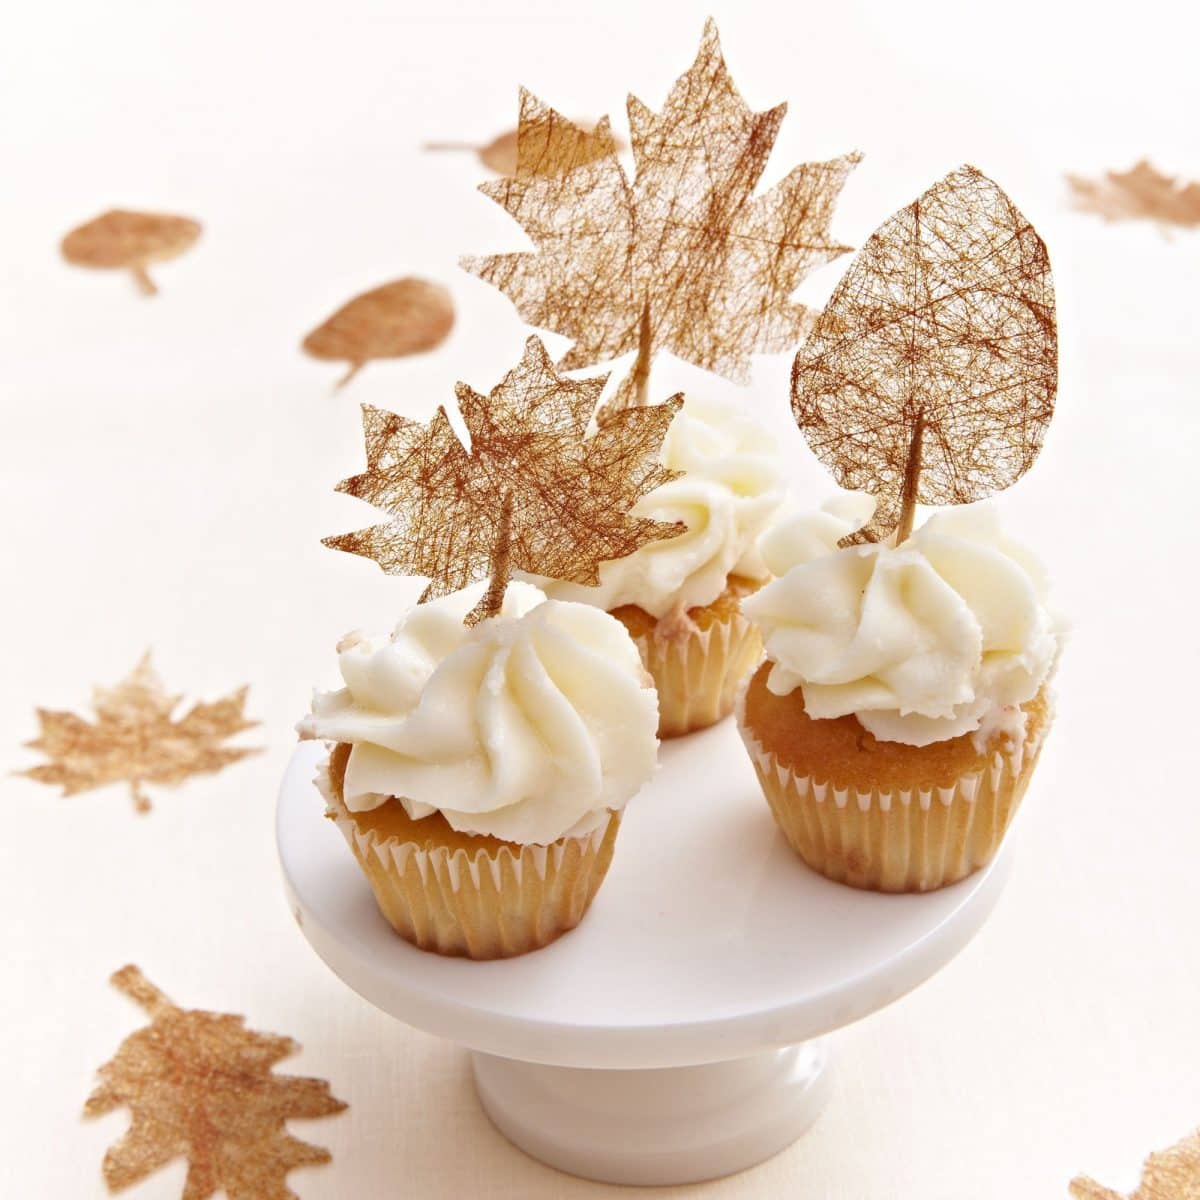 Darcy Miller Designs “Gold Leaf” Cupcake Toppers Thanksgiving, Cricut, Fall Décor, Autumn Décor, Cupcake Topper, Dessert Display, Cupcakes, Toothpick Craft, Leaf Craft